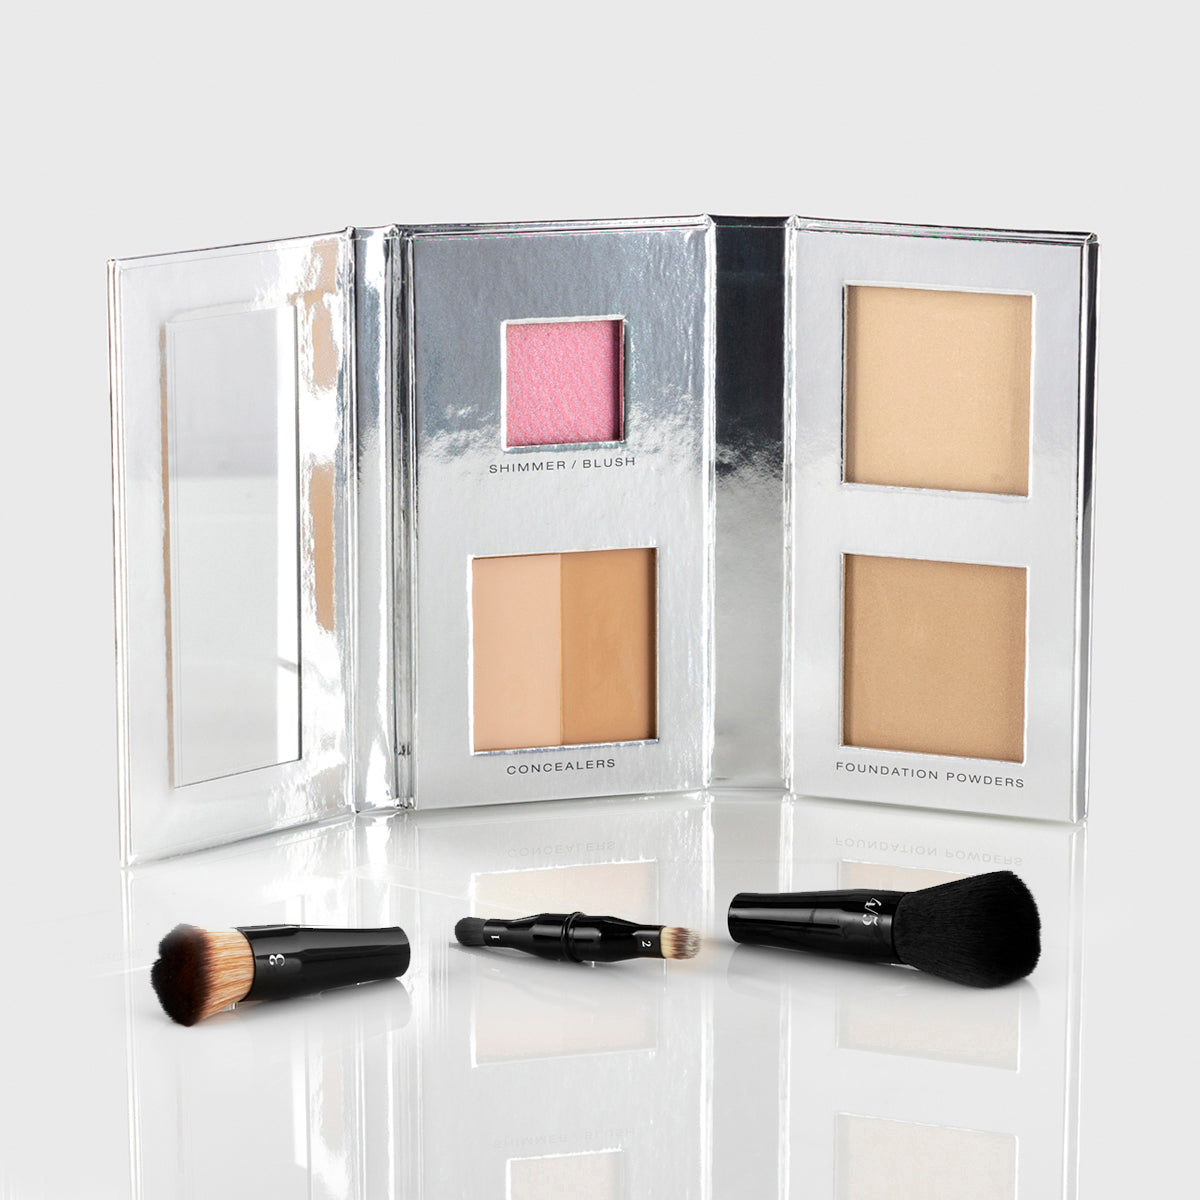 a silver makeup palette with mirrored flap and 1 blush, 2 concealers and 2 foundation powers in medium light shades; a black, travel-sized nesting brush set is splayed out in front of the palette